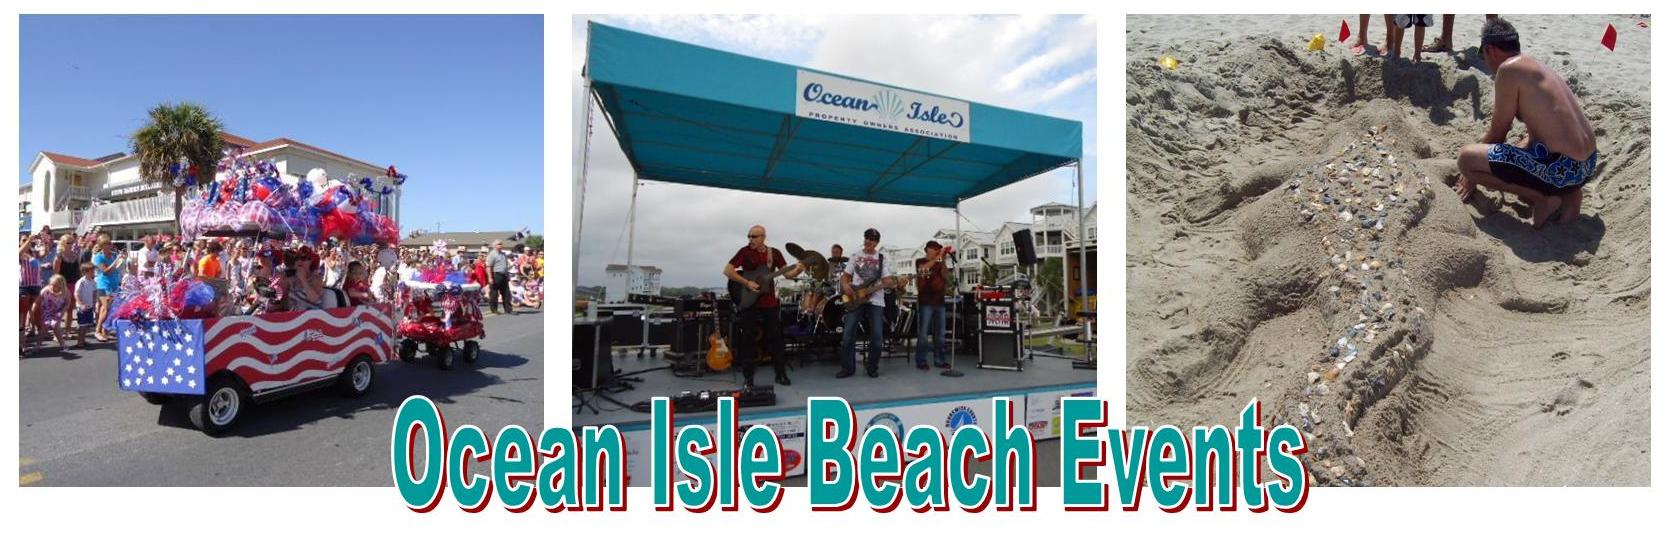 Ocean Isle Beach NC Activities and Events McClure